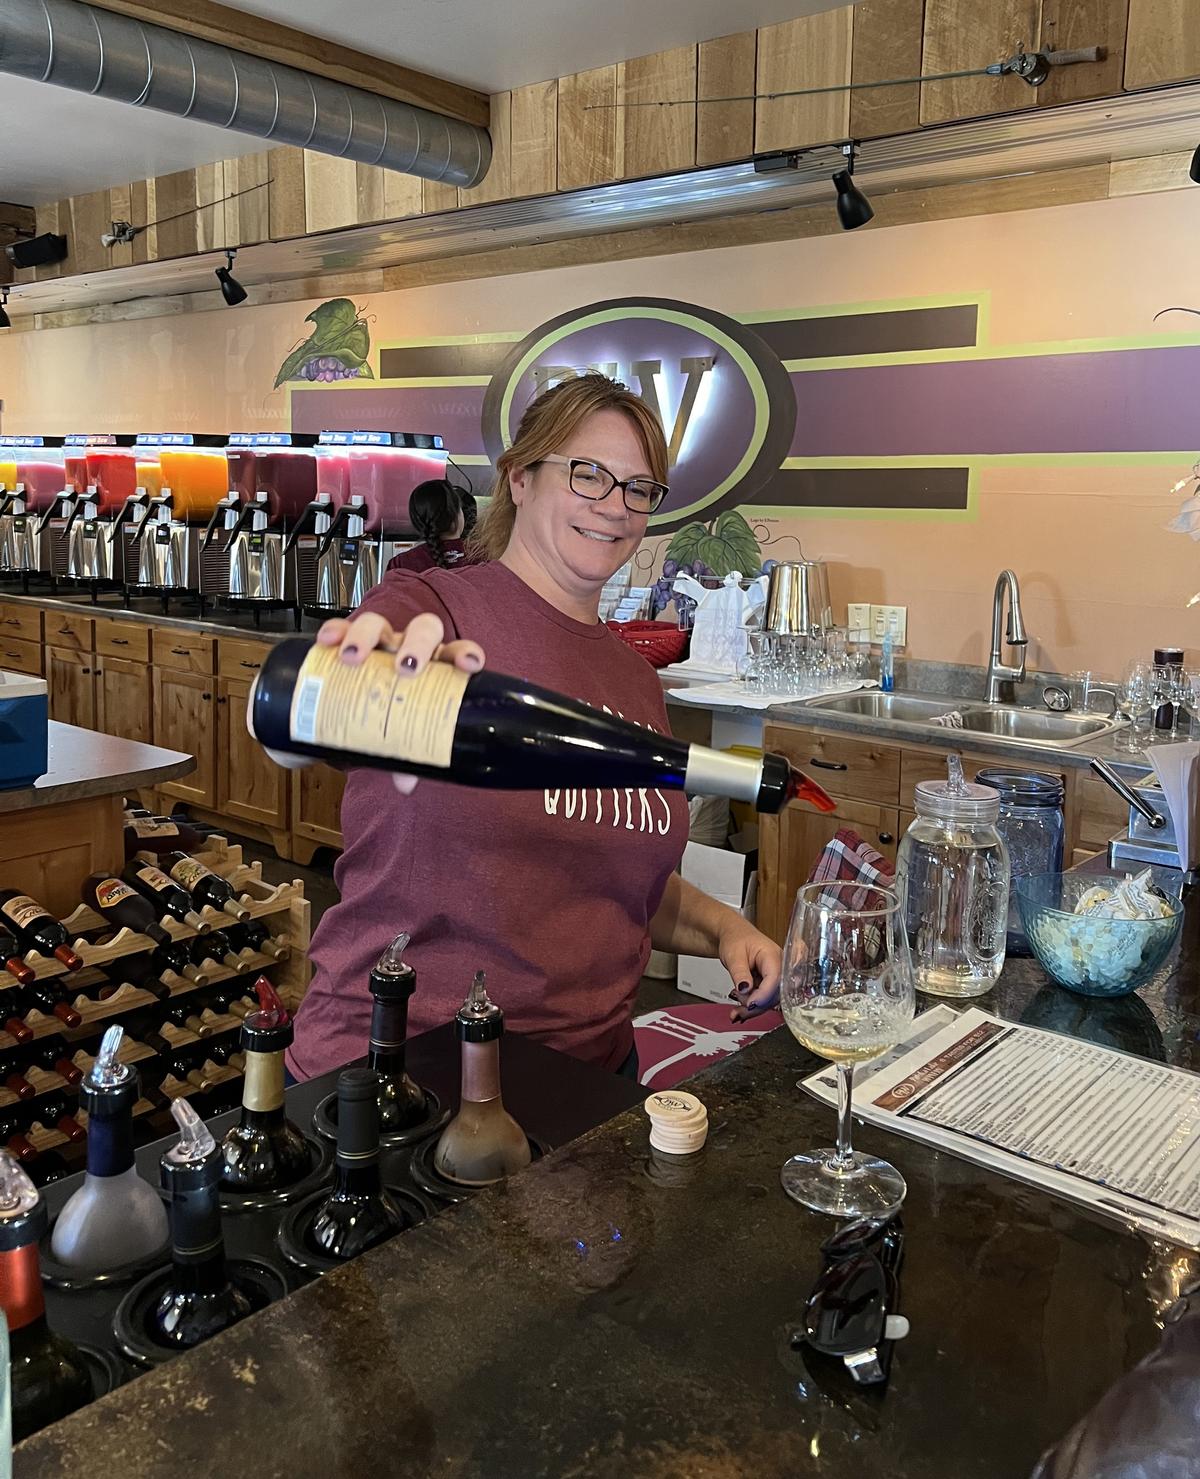 JoLee Kasprzak, one of the managers of Patoka Lake Winery in Birdseye, pours samples of wine for customers. The winery also includes overnight accommodations with winery suites and unique silo suites that are converted from silos. Wine cruises are offered at nearby Patoka Lake Marina. (Mary Ann Anderson/TNS)